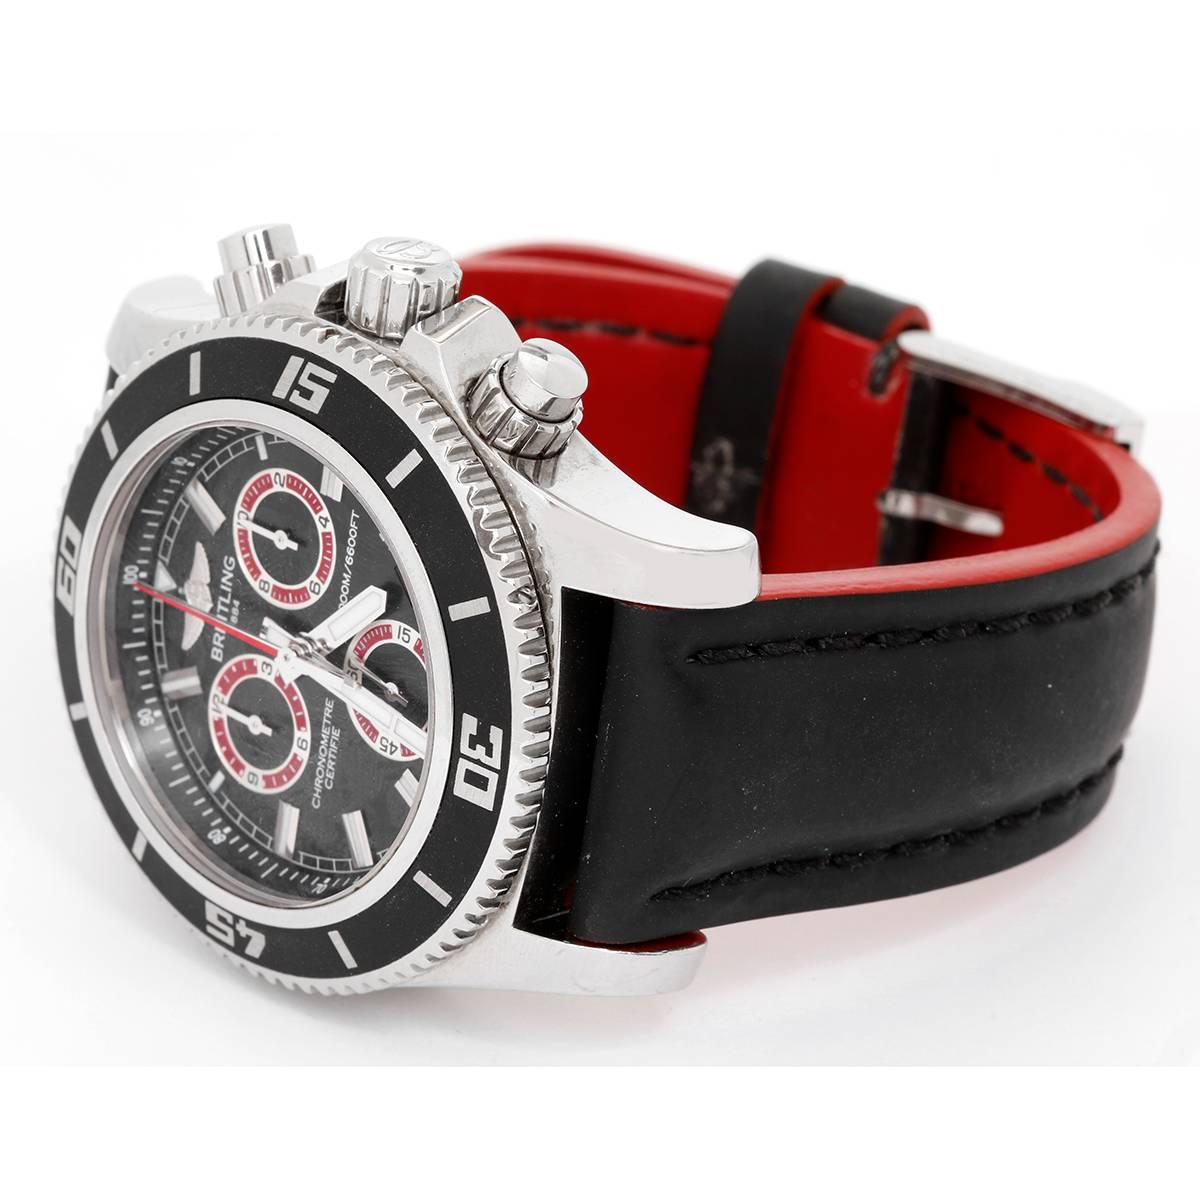 Breitling Superocean Chronograph M2000 Mens Watch A73310A8 -  Automatic winding, Chronograph. Stainless steel case with rotating bezel with black insert (46mm diameter). Black dial with red rim subdials. Breitling black and red  strap with Breitling